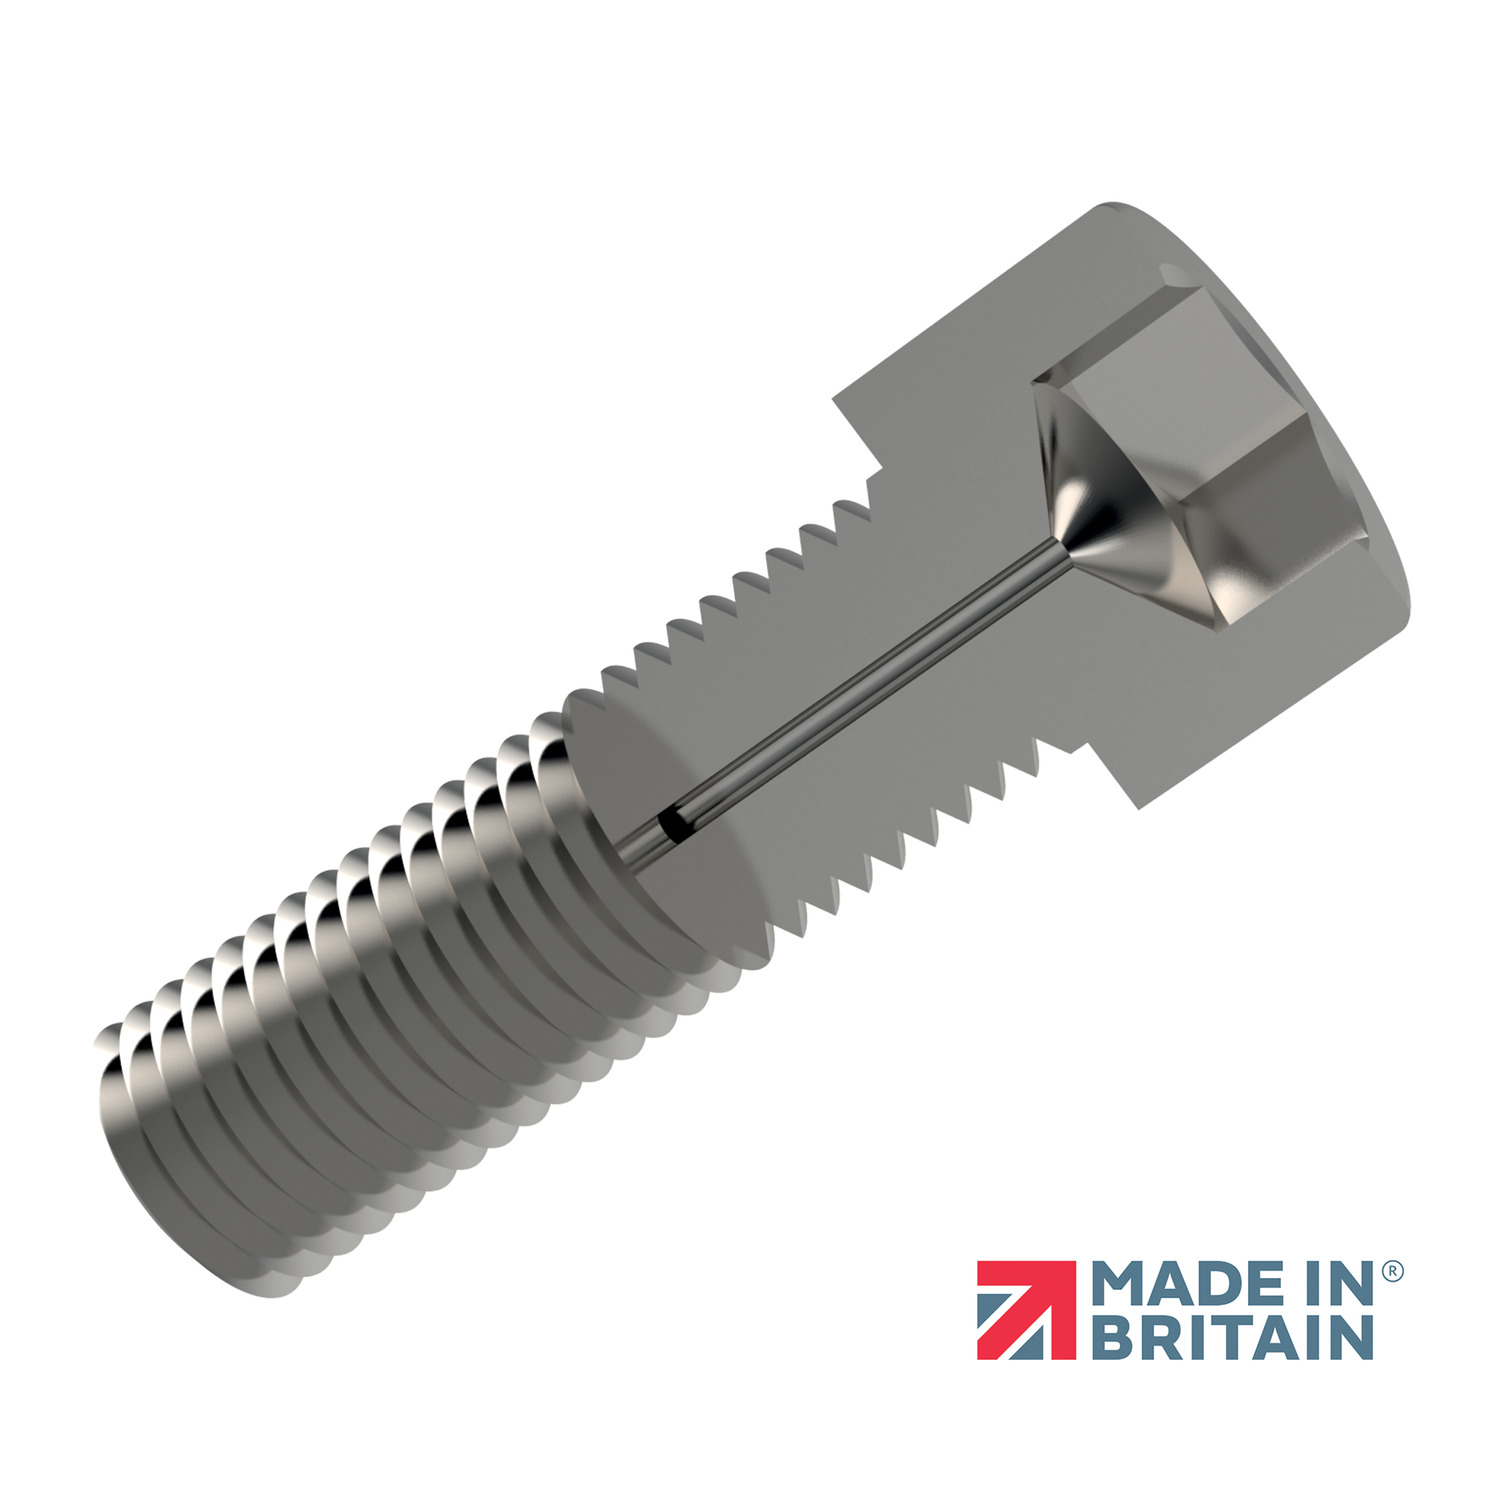 Vented Screws - Cap Head Hex drive cap head vented screws available in AISI 303 series stainless steel and in 316 series stainless (P0090.A4). To DIN 912.